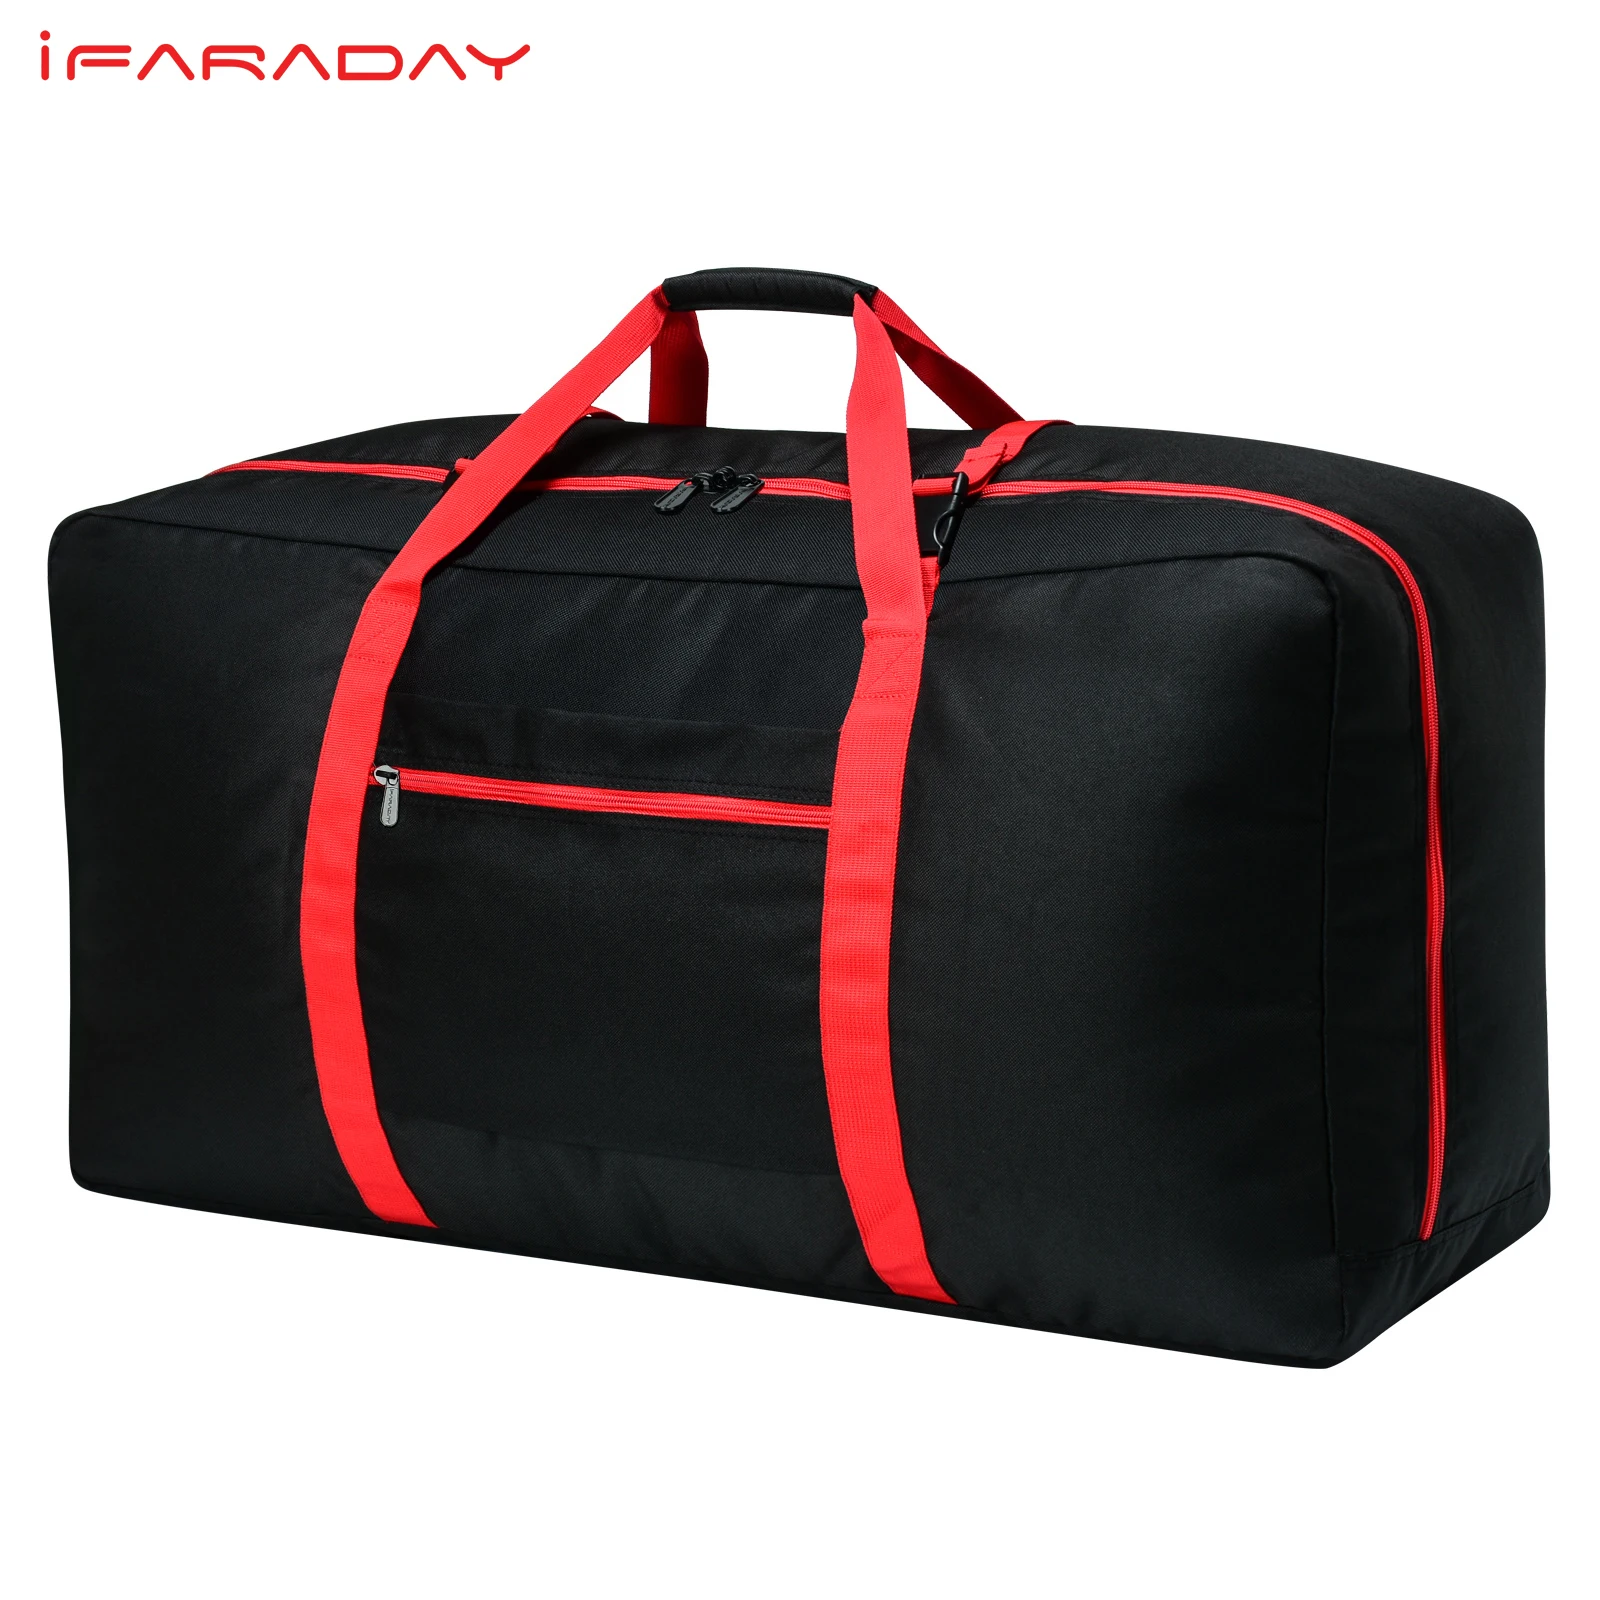 

IFARADAY Unisex Travel Bag 32.5 Large Capacity Foldable Duffle Bags Waterproof Multifunctional Carry on Luggage for Storage/Camp